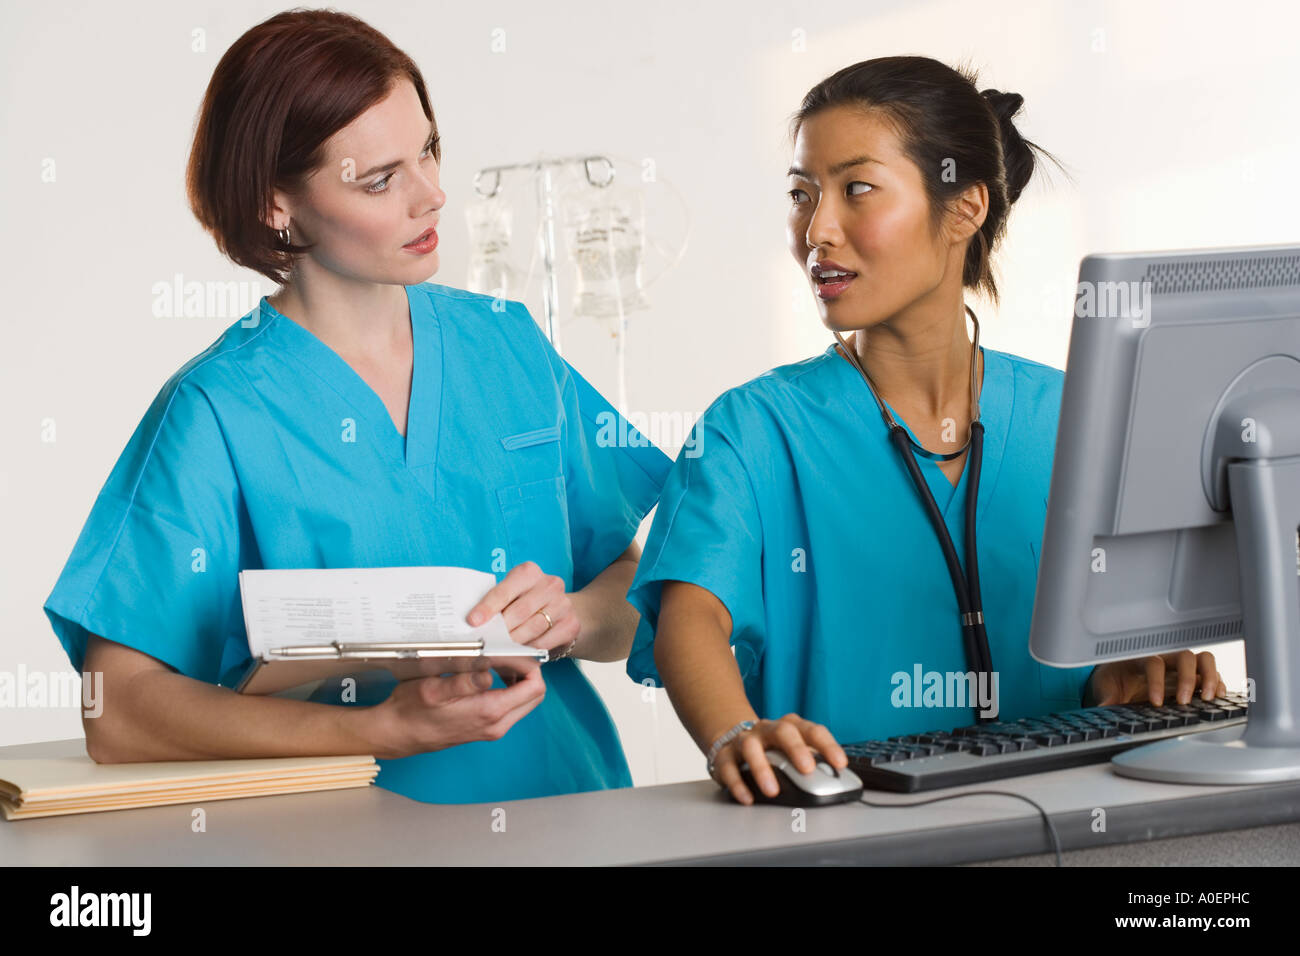 Medical staff at work Stock Photo